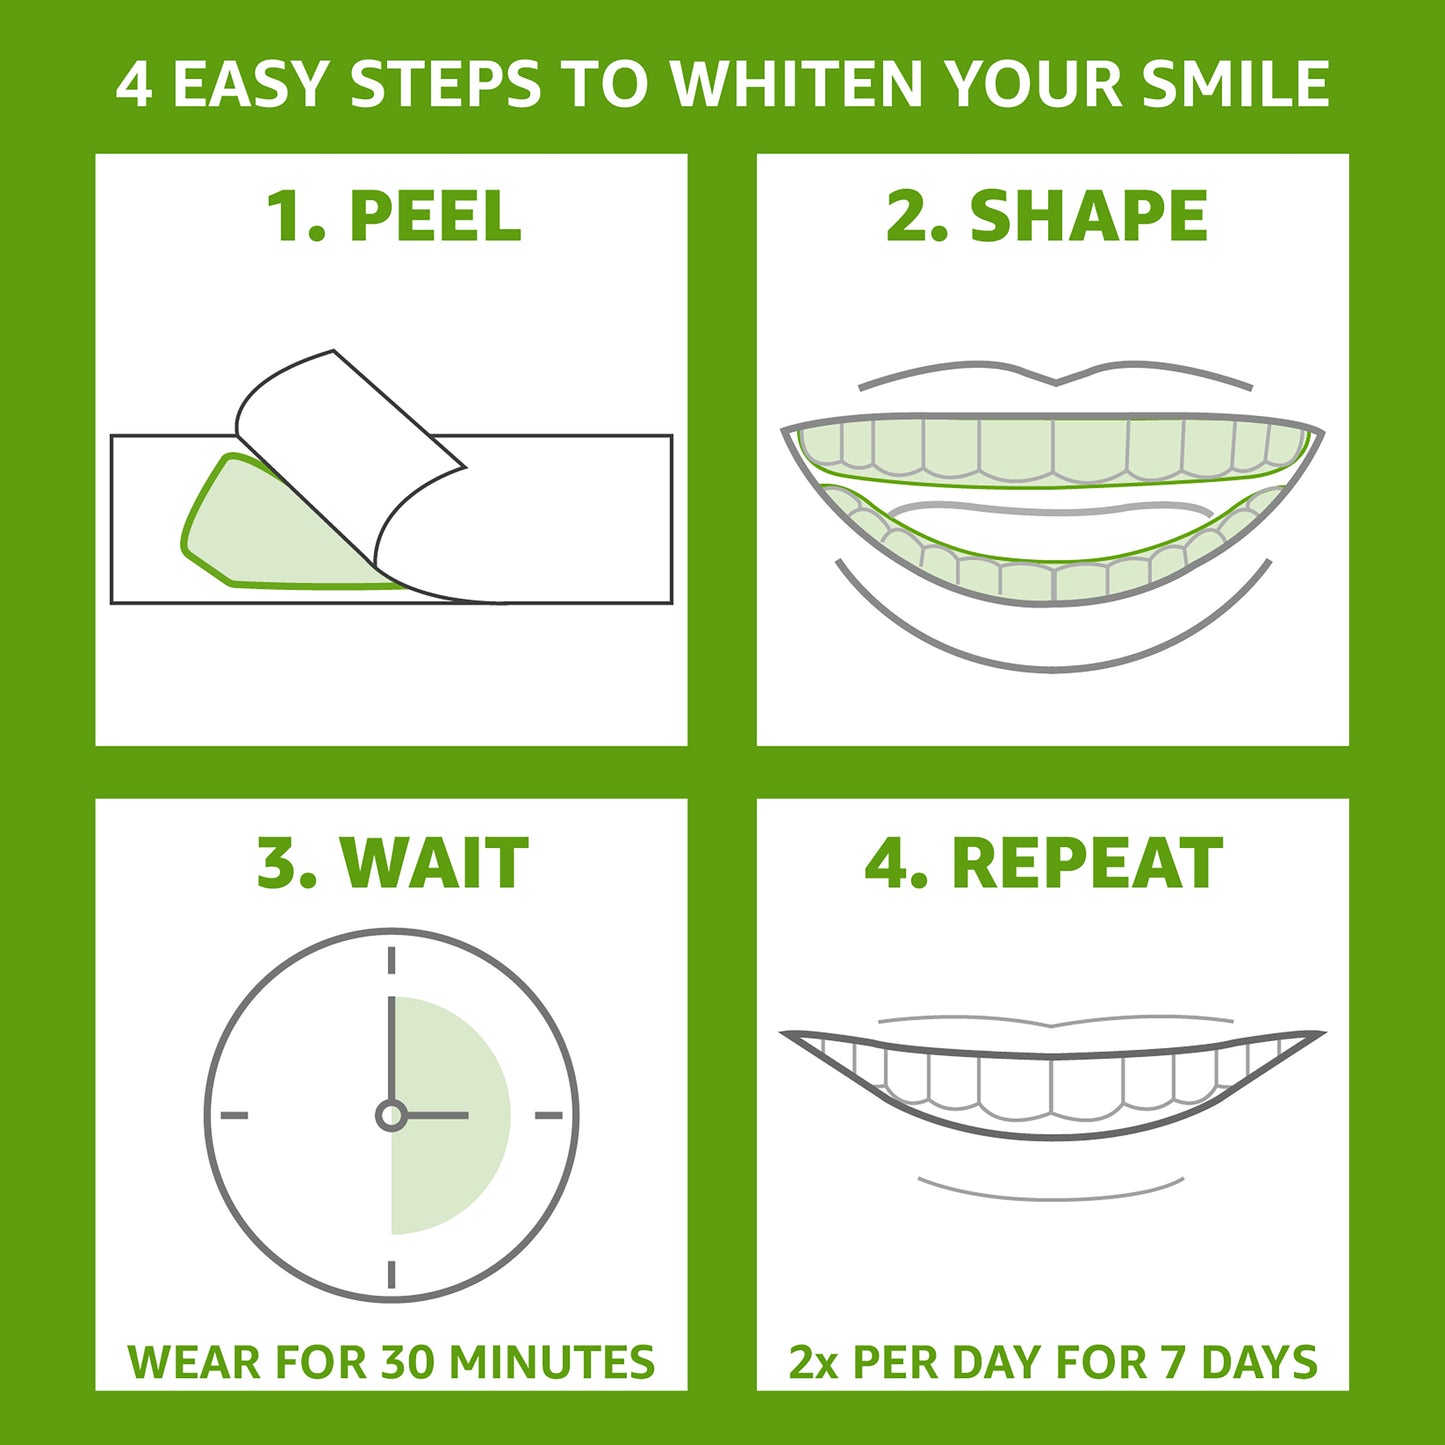 4 Easy Steps to Whiten Your Smile. 1. Peel 2. Shape 3. Wait, wear for 30 minutes 4. Repeat 2x per day for 7 days